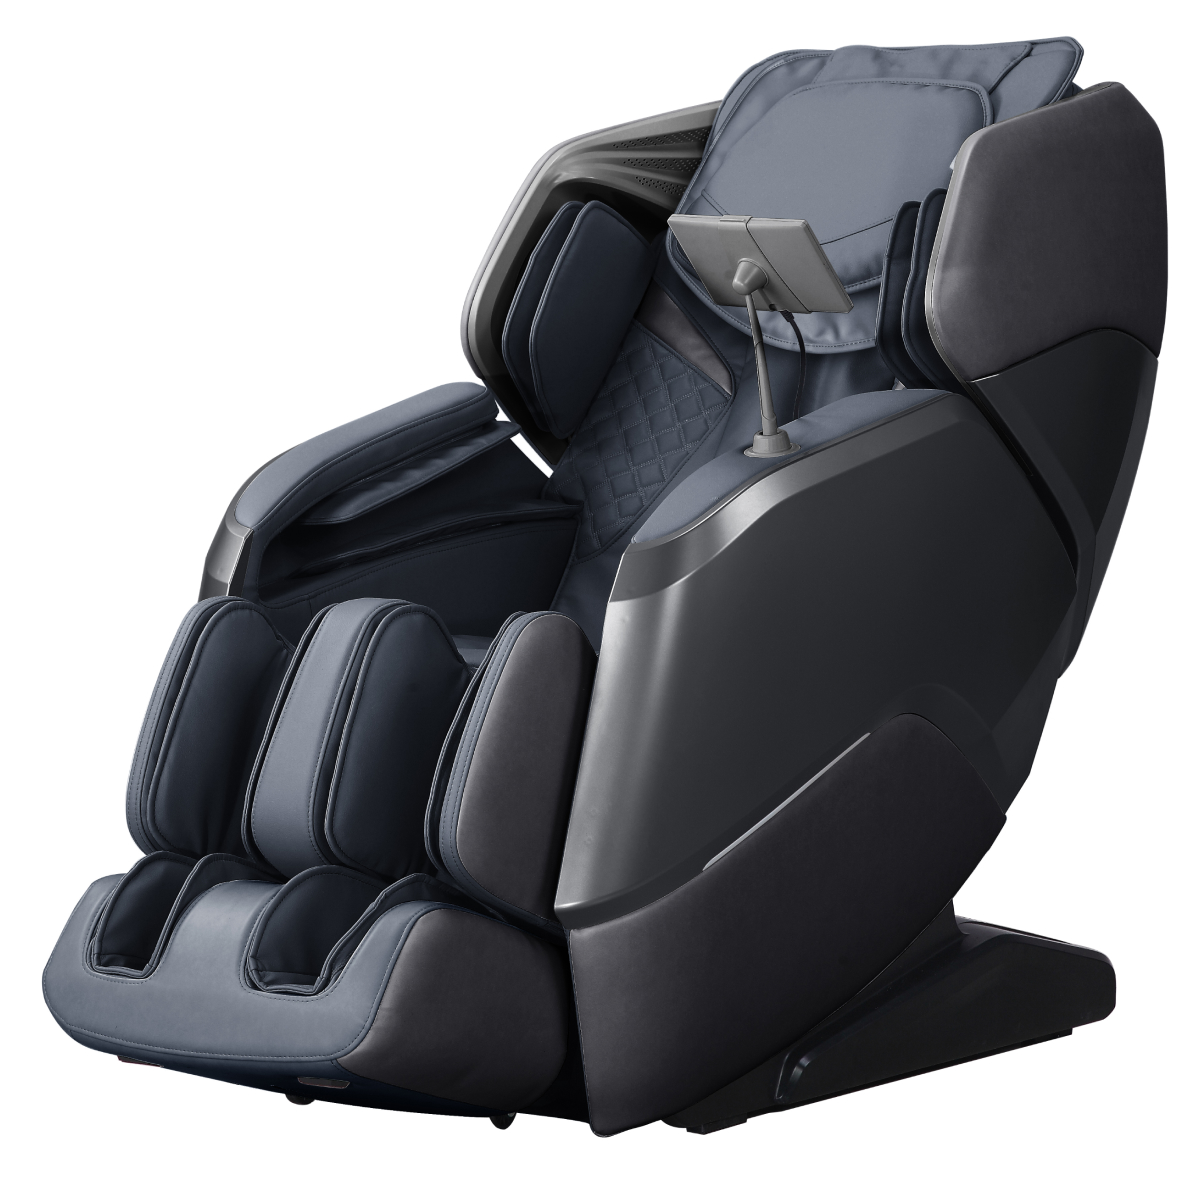 [New Launch] The Brand New NOVA DUO 2023 - Dual Track Massage Chair GRAY